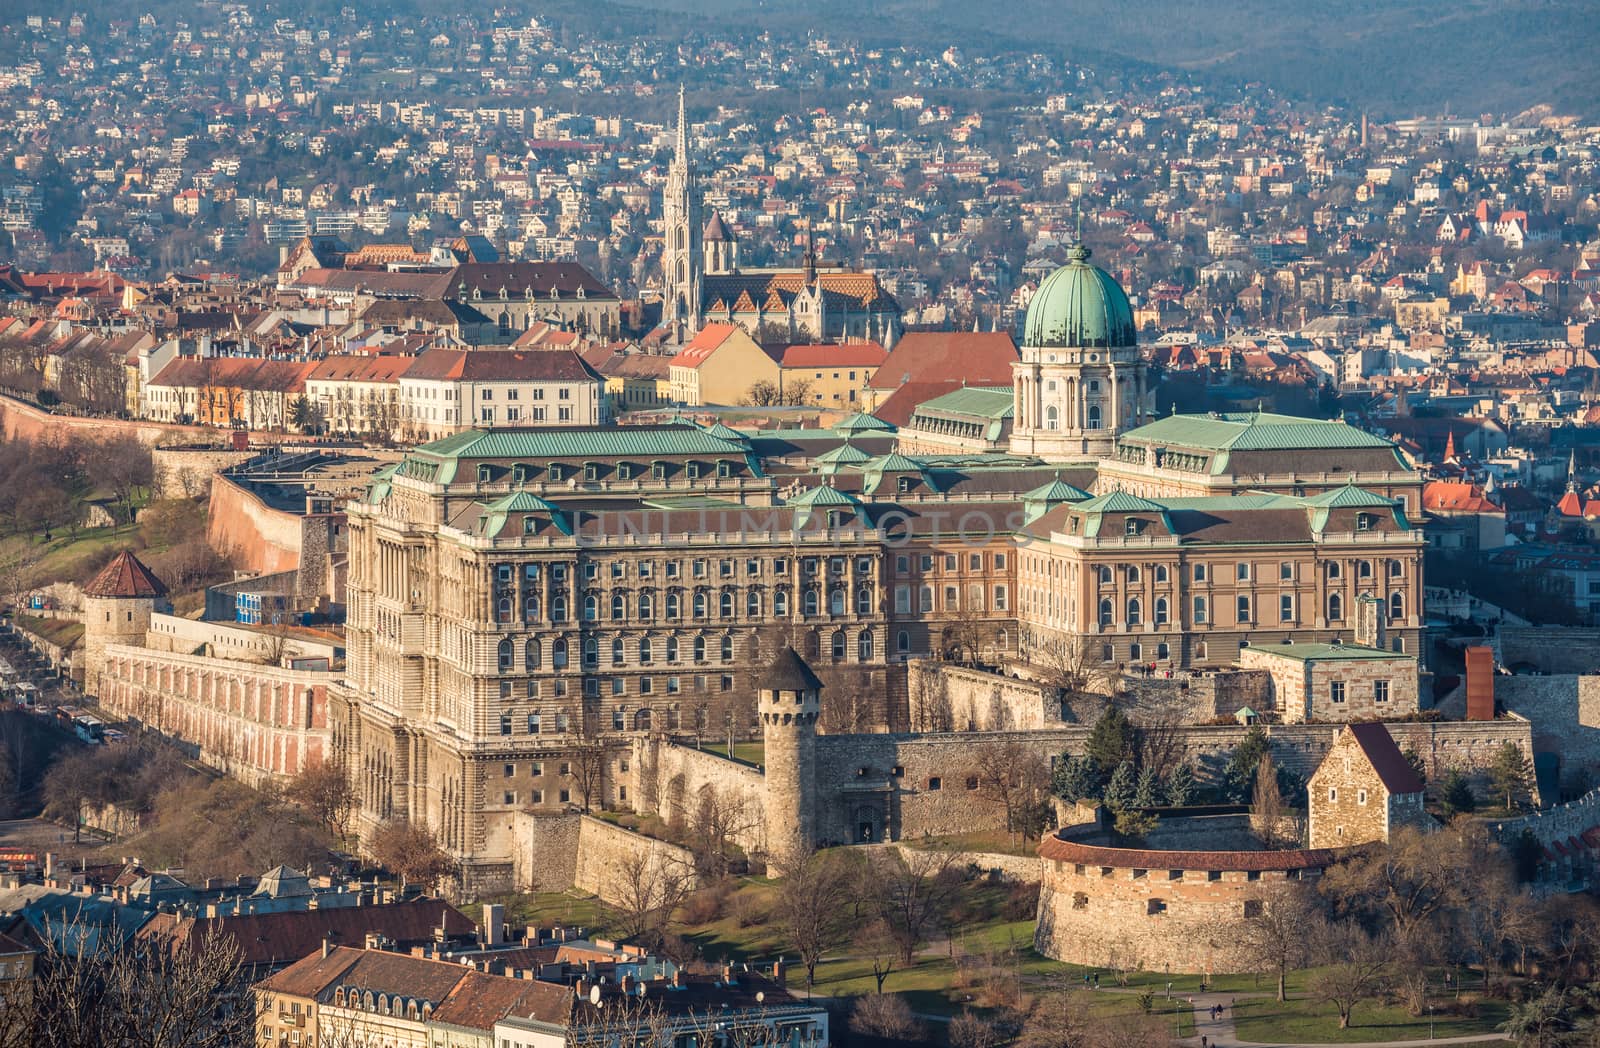 Buda Castle or Royal Palace in Budapest, Hungary Lit by Setting Sun